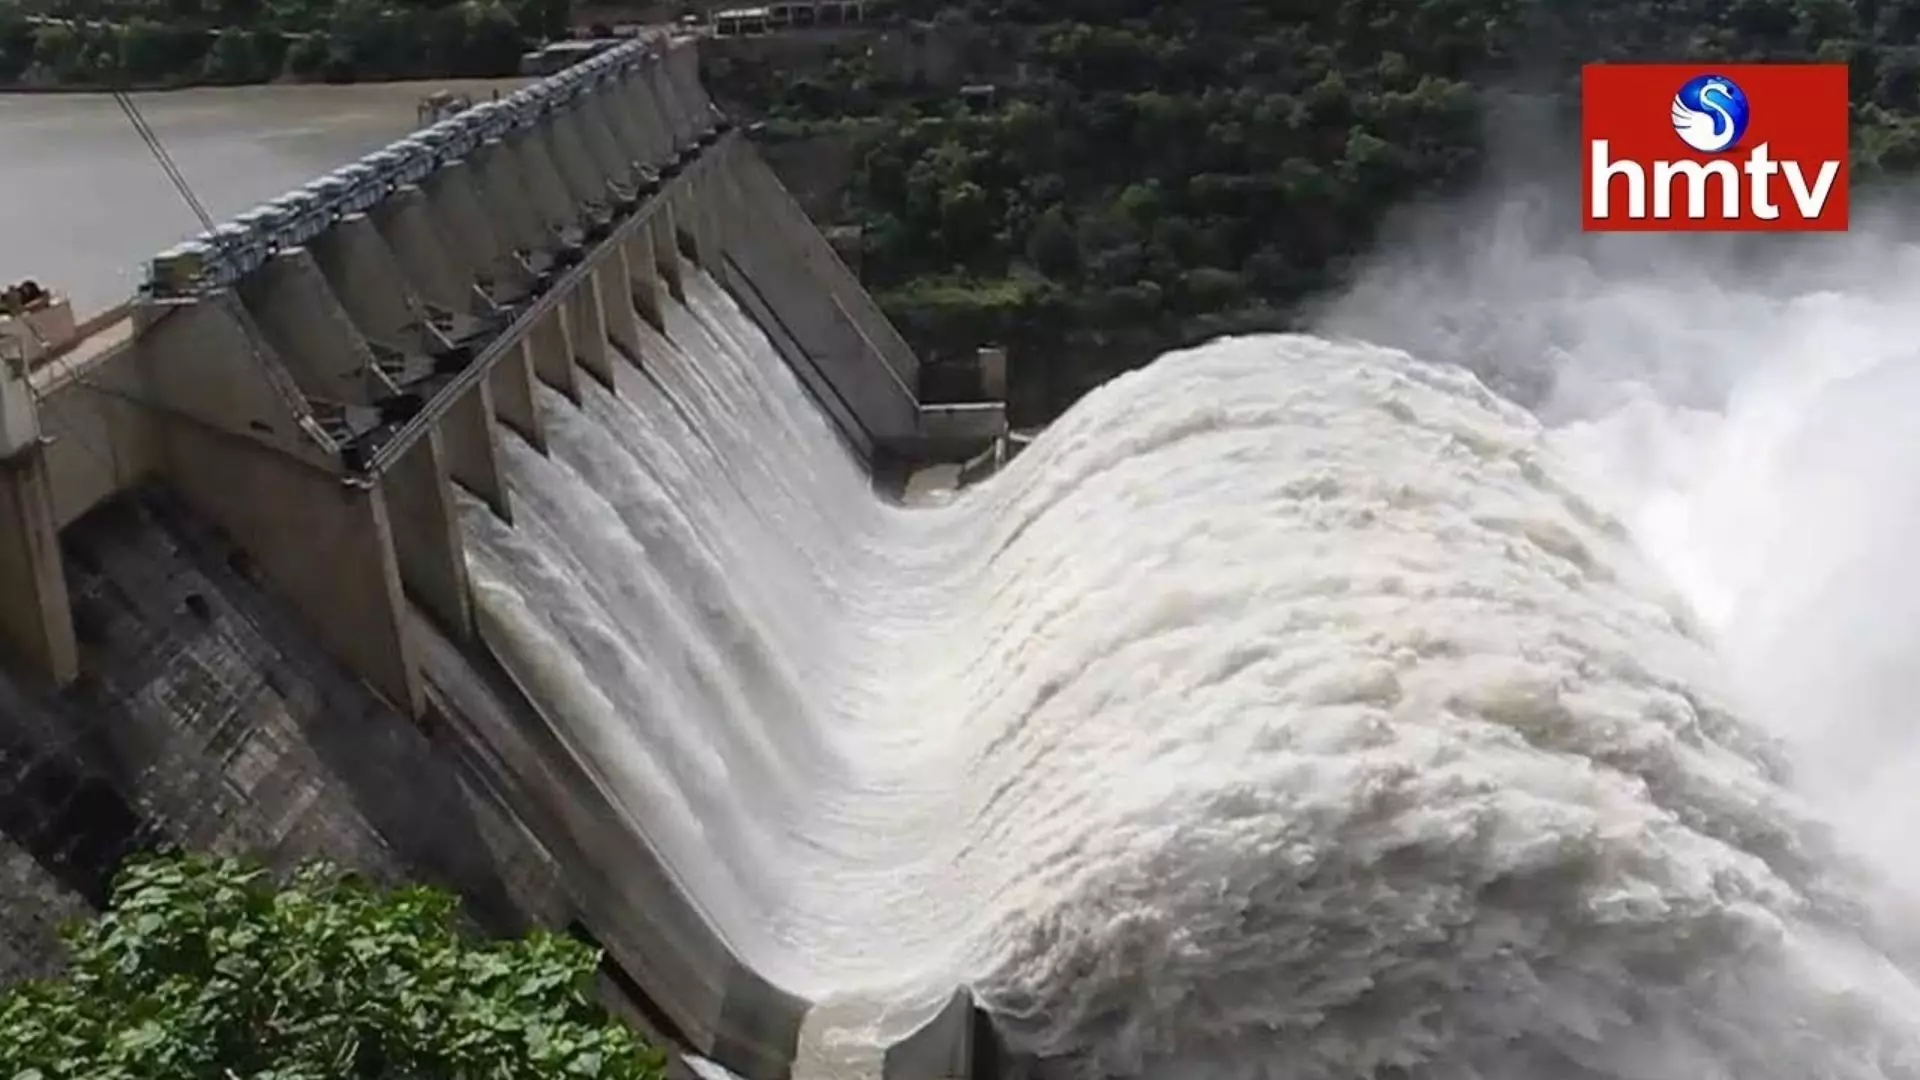 Ongoing Flood to Nagarjuna Sagar Dam So Water Release From Crest Gates Today Evening 01 08 2021